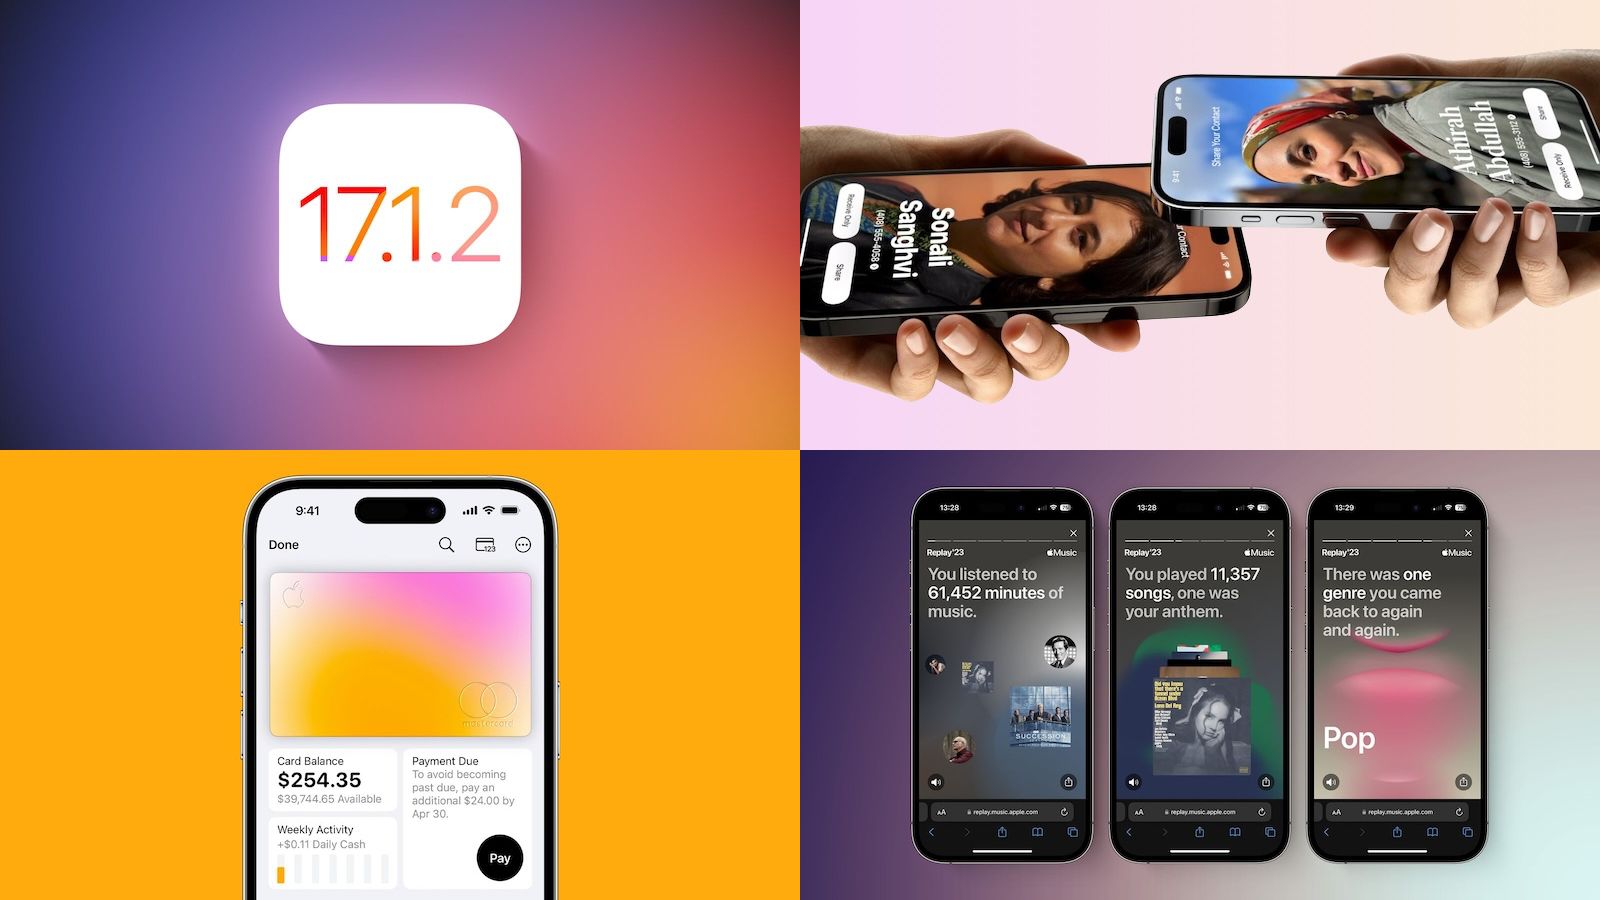 Top Stories: iOS 17.1.2 Released, NameDrop Misinformation, and More